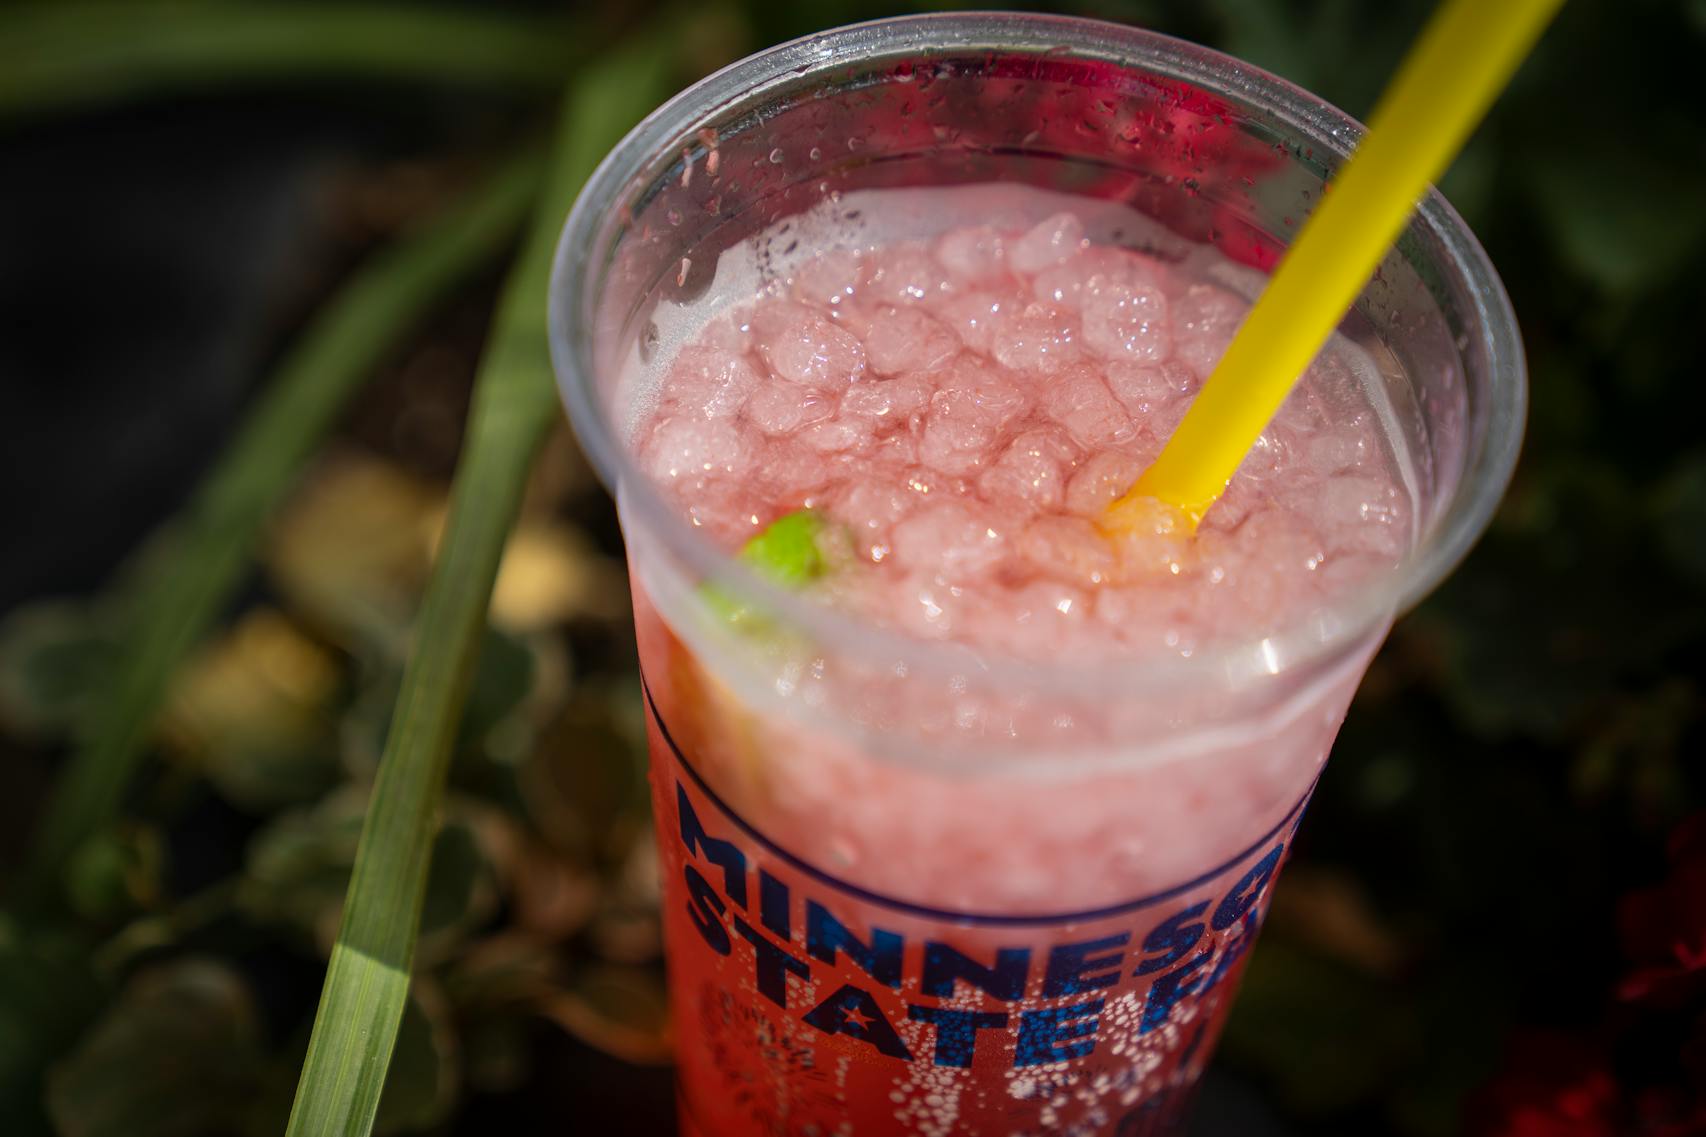 Cherry Limeade from 3B Fresh Squeeze Lemonade & Foot Long Corn Dogs. The new foods of the 2023 Minnesota State Fair photographed on the first day of the fair in Falcon Heights, Minn. on Tuesday, Aug. 8, 2023. ] LEILA NAVIDI • leila.navidi@startribune.com